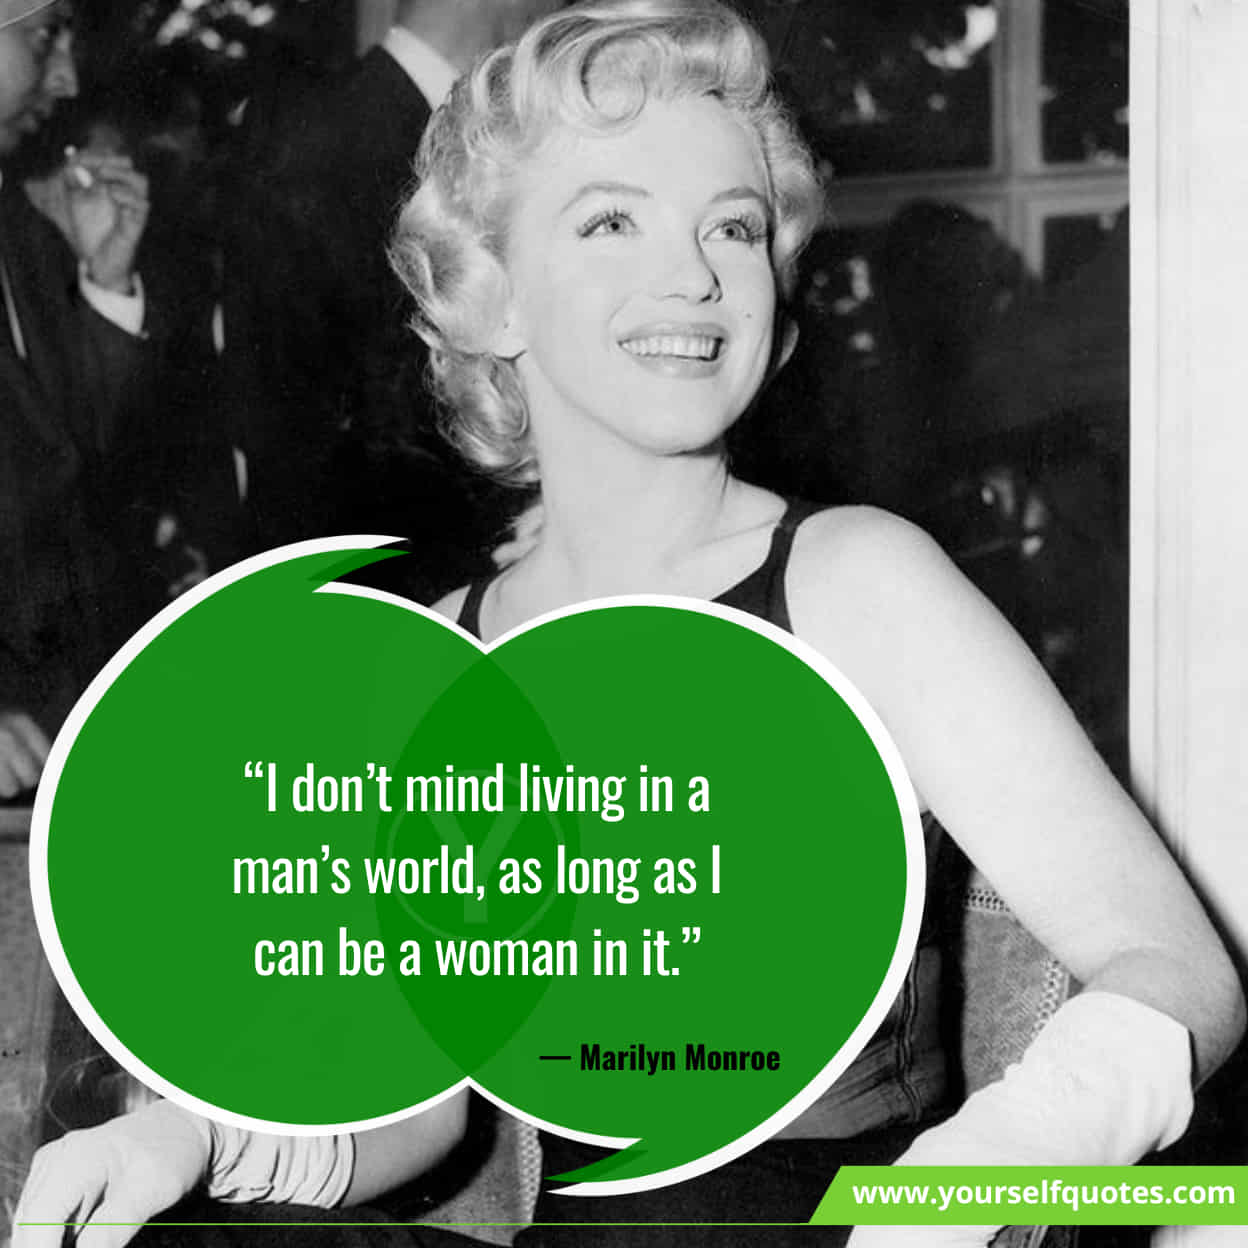 Marilyn Monroe Quotes About Sexuality